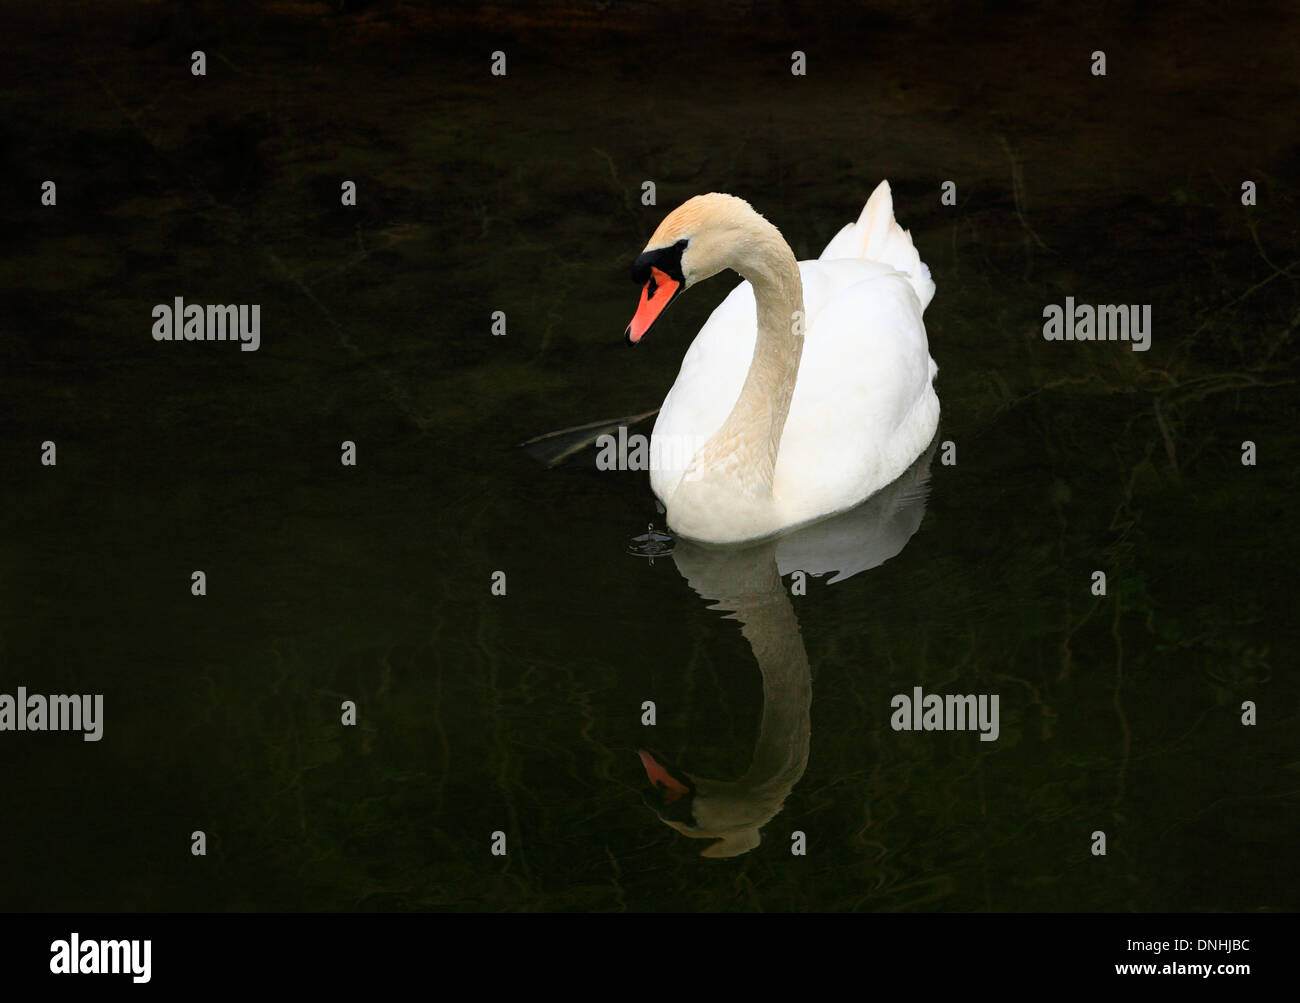 Mute swan on dark ground with a water droplet dripping down into the water. Stock Photo